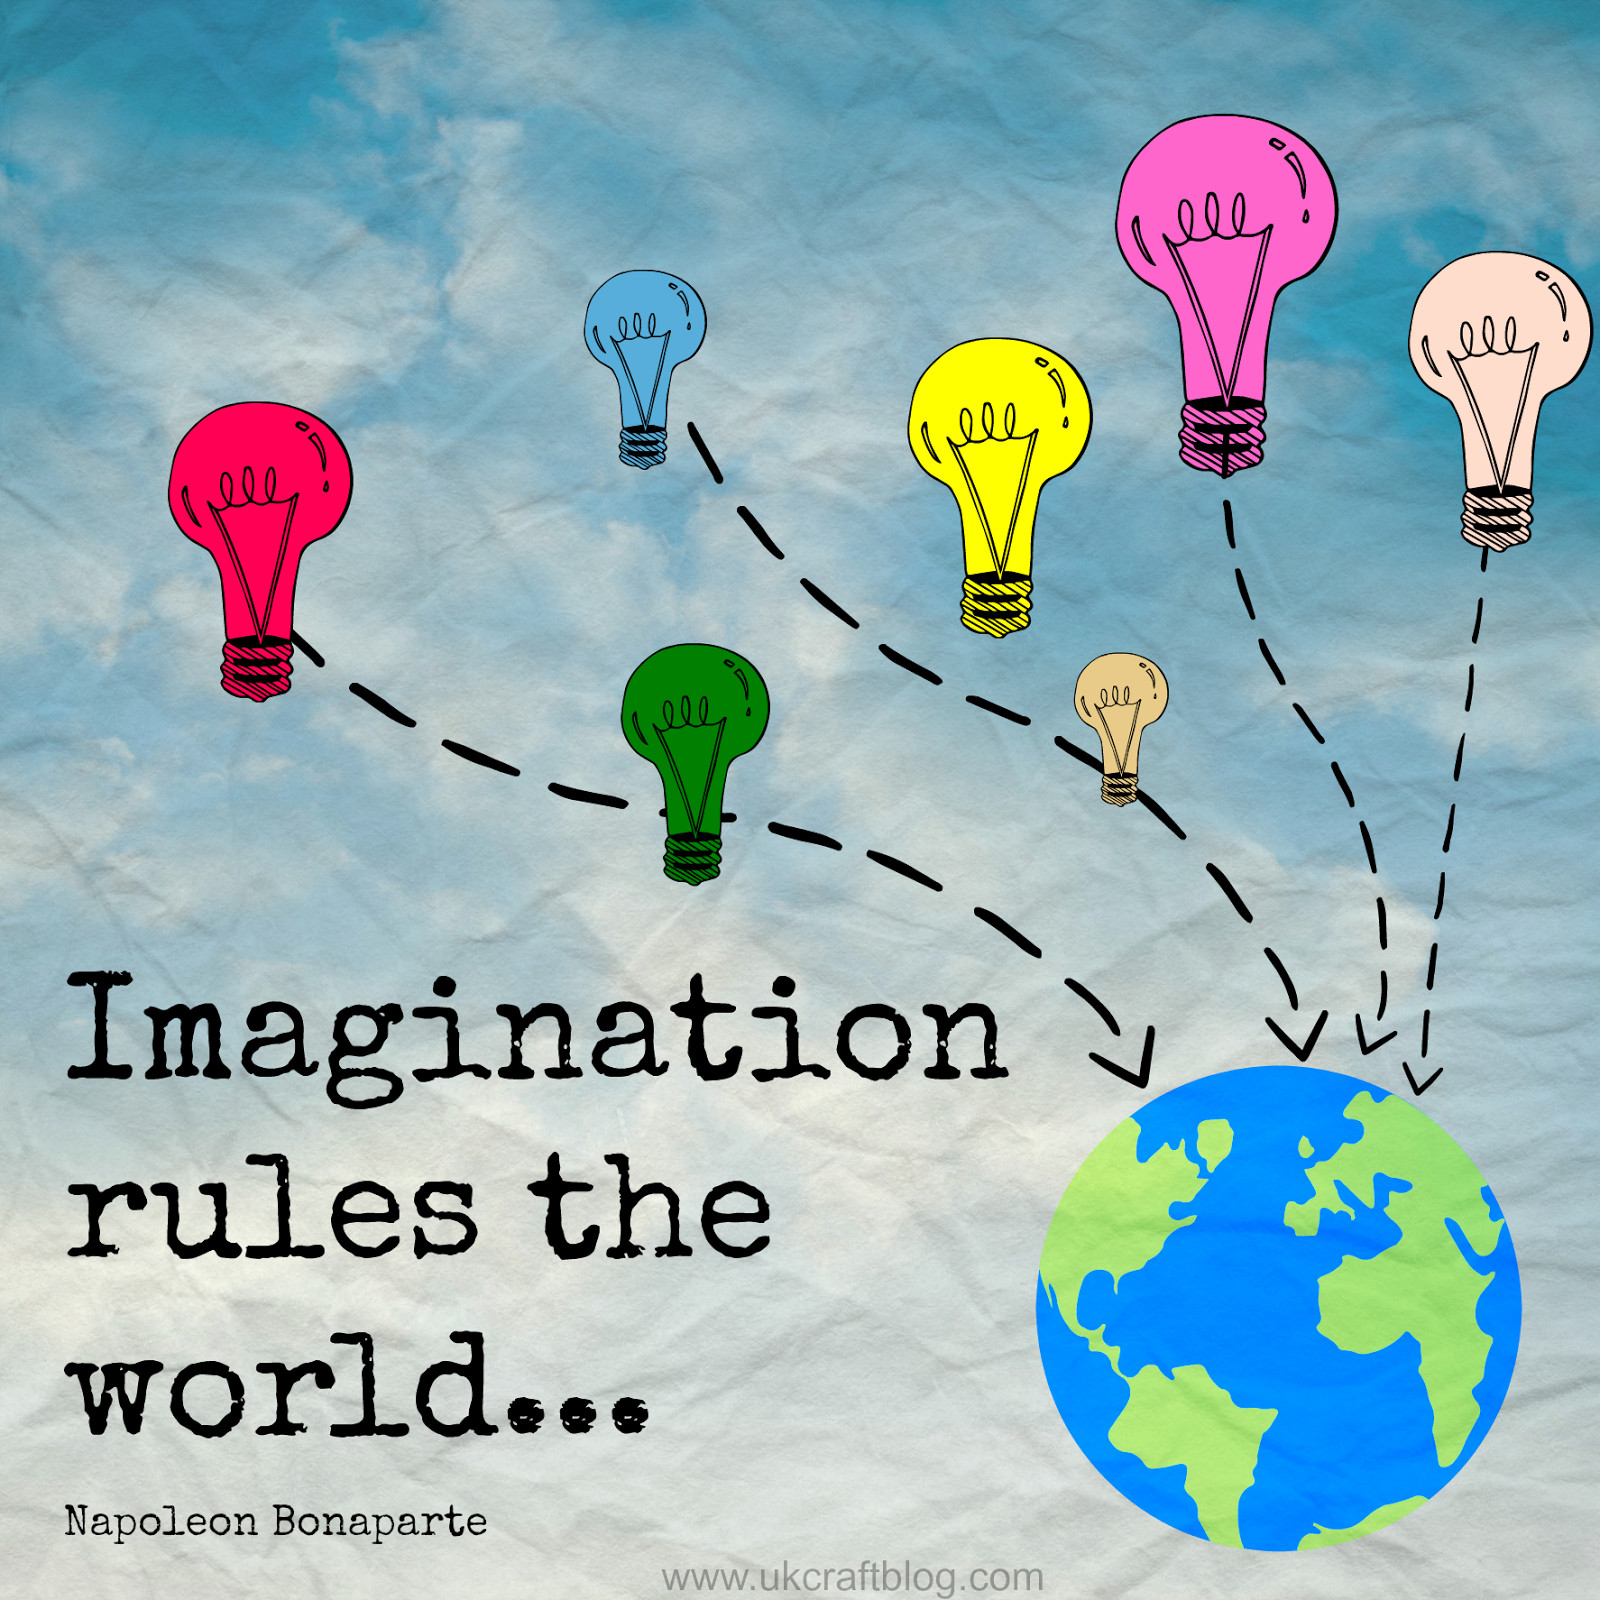 Kids Imagination Quotes
 Quotes about Childhood imagination 58 quotes